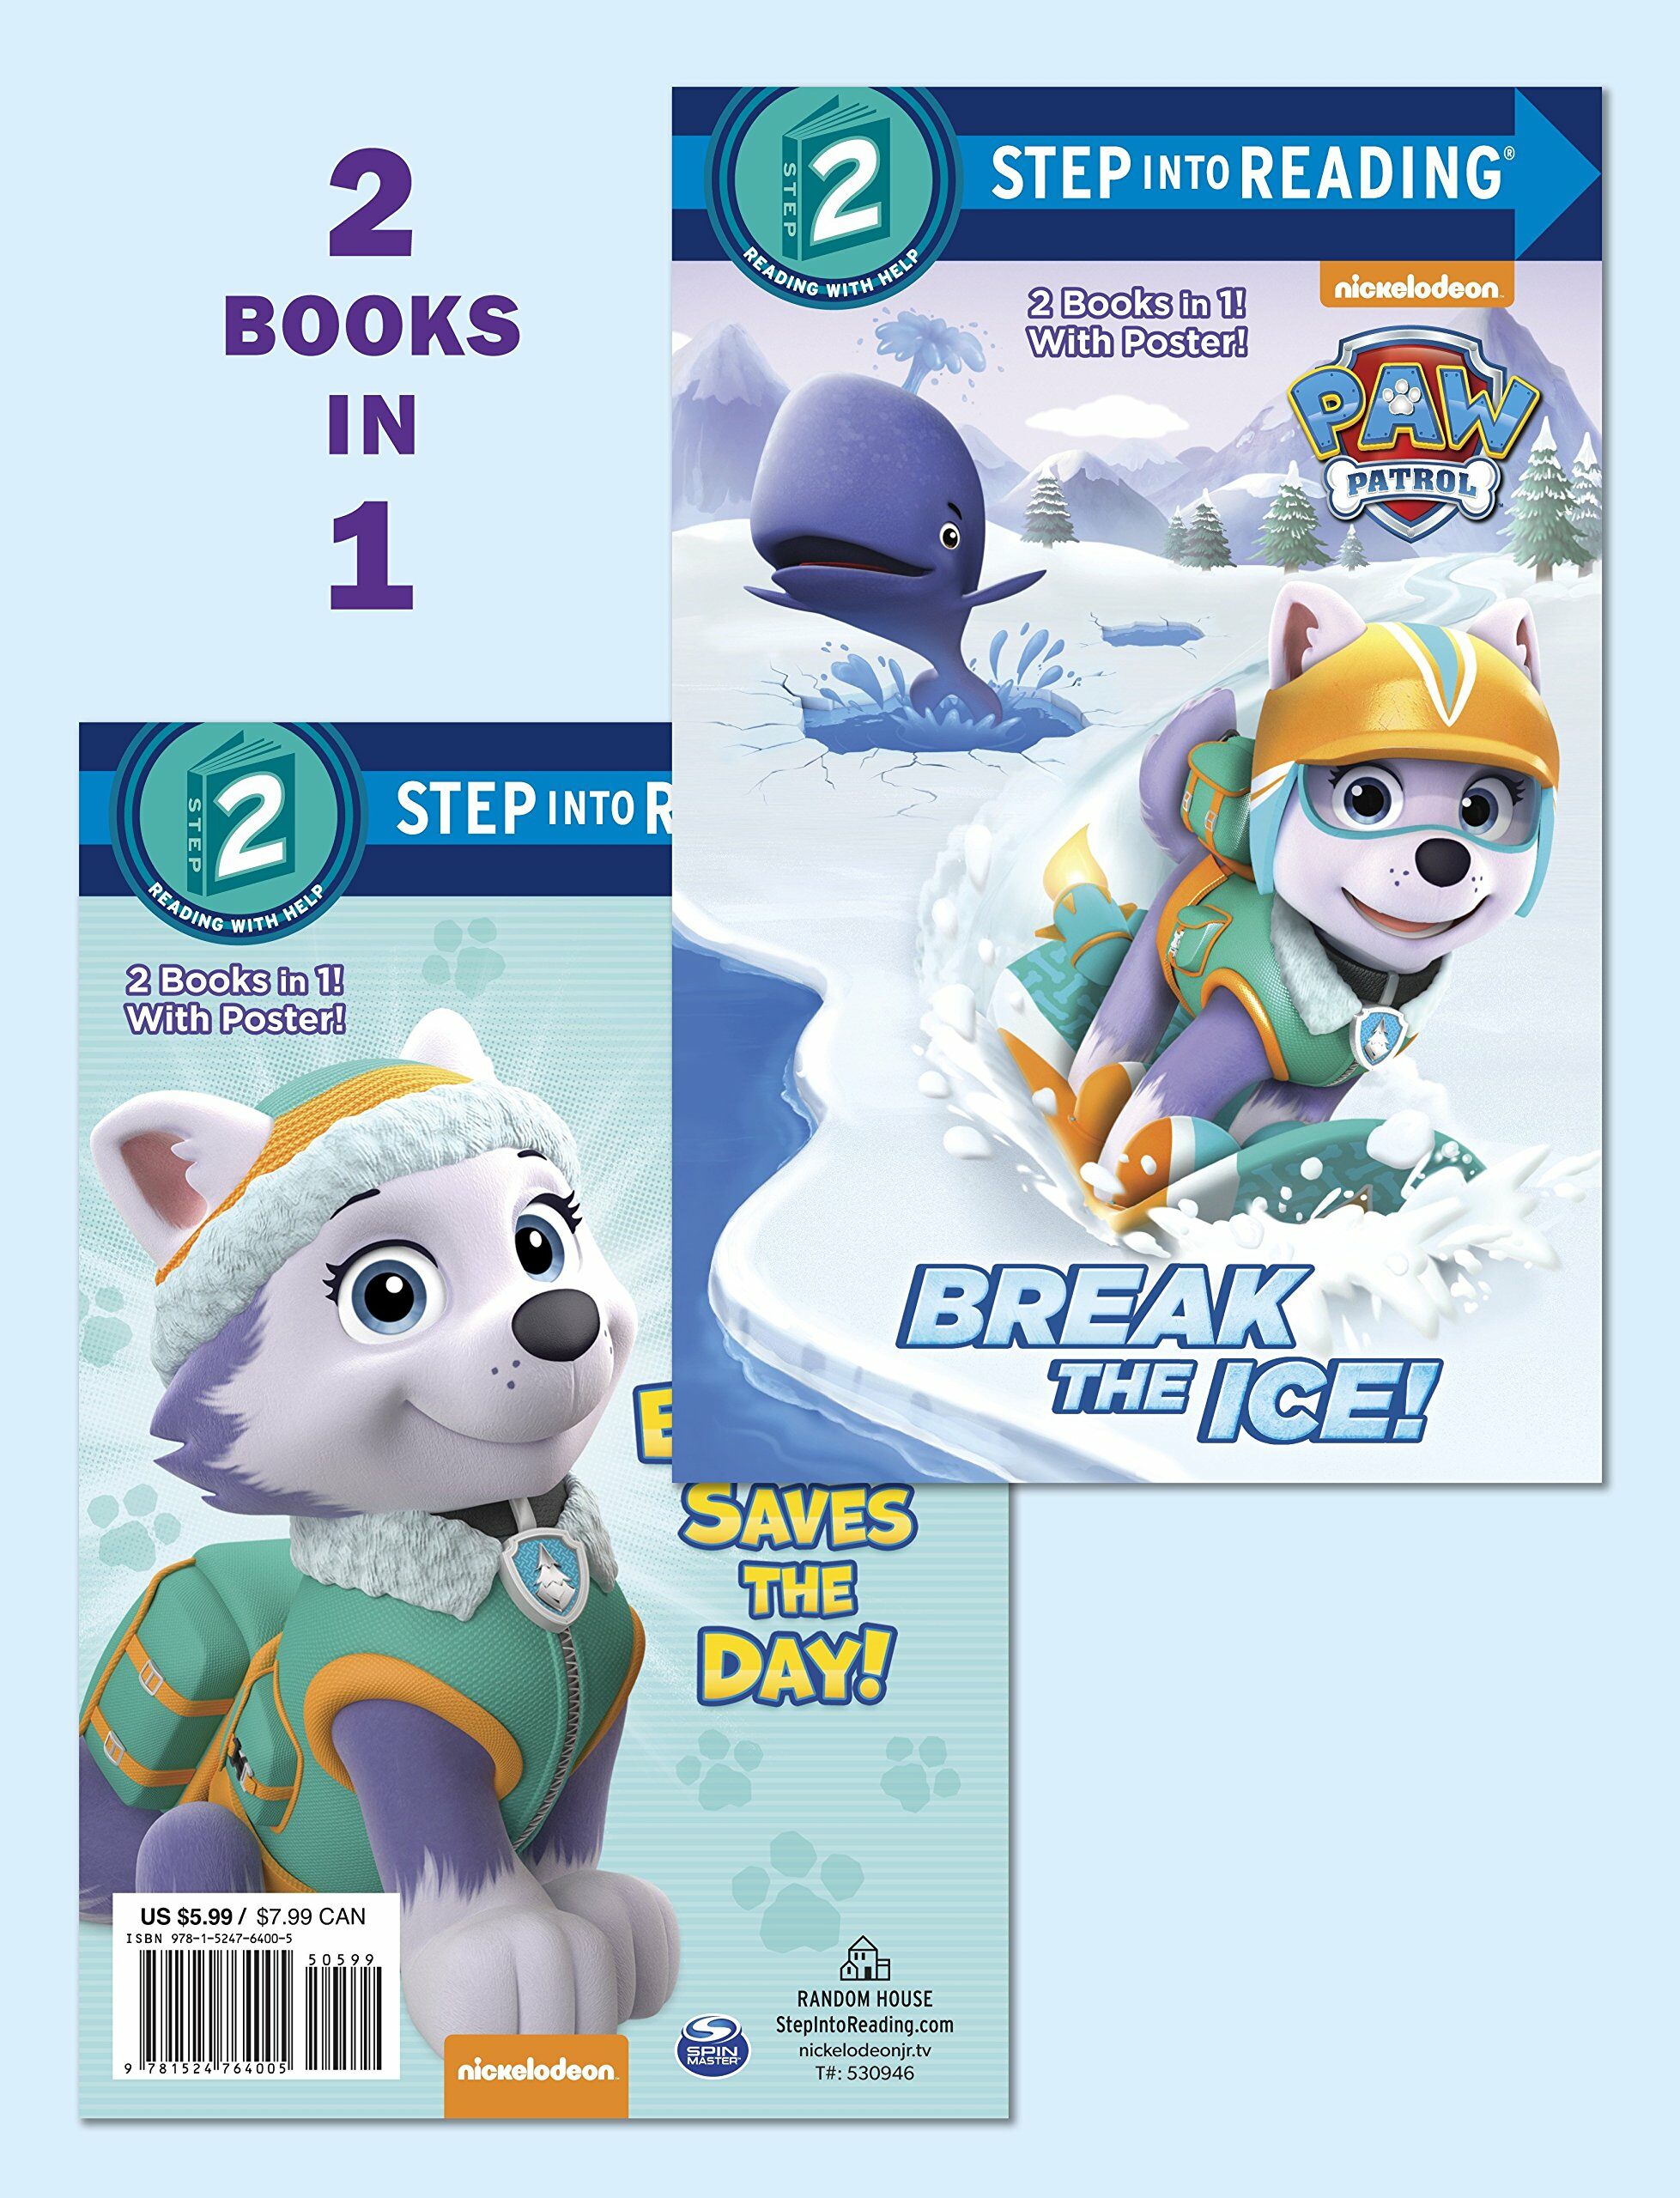 Break the Ice!/Everest Saves the Day! (Paw Patrol) (Paperback)